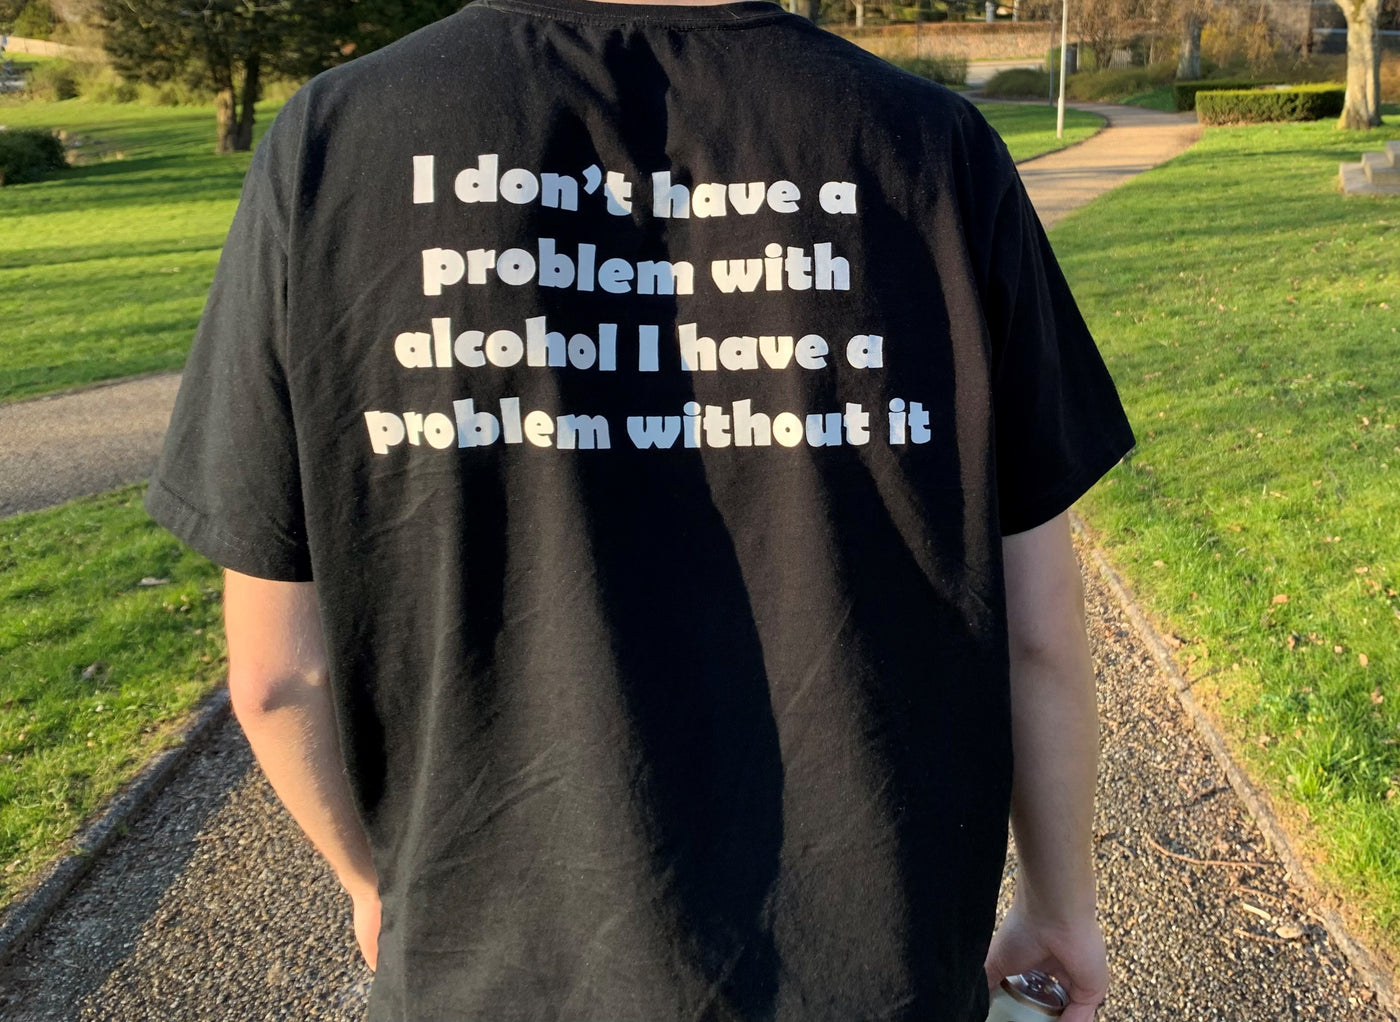 I DONT HAVE A PROBLEM WITH ALCOHOL